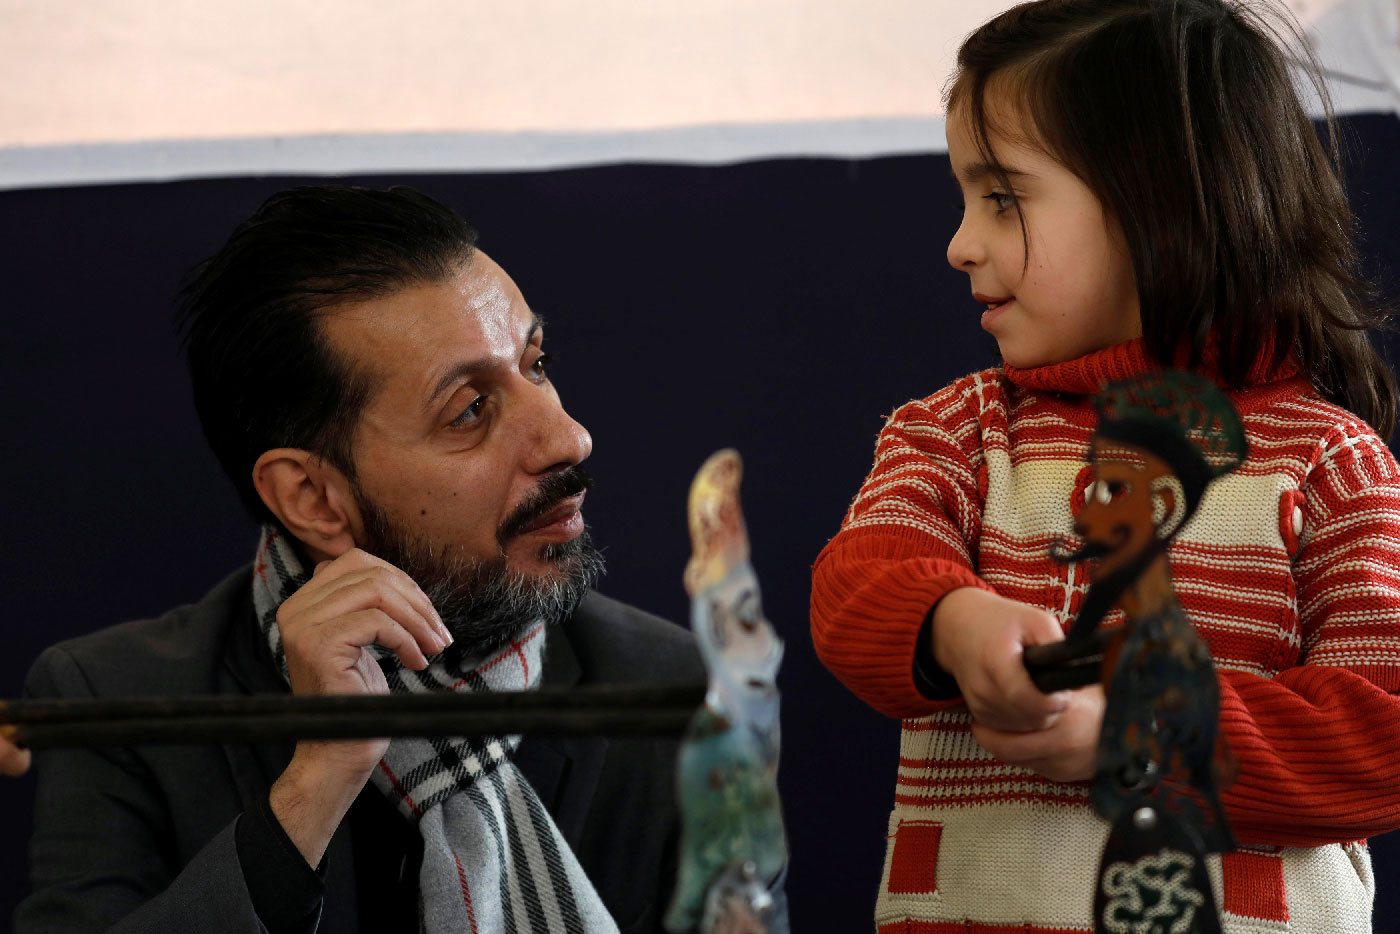 Shadi al-Hallaq, a puppeteer, is seen next to a disabled child during a performance in Damascus, Syria December 3, 2018.